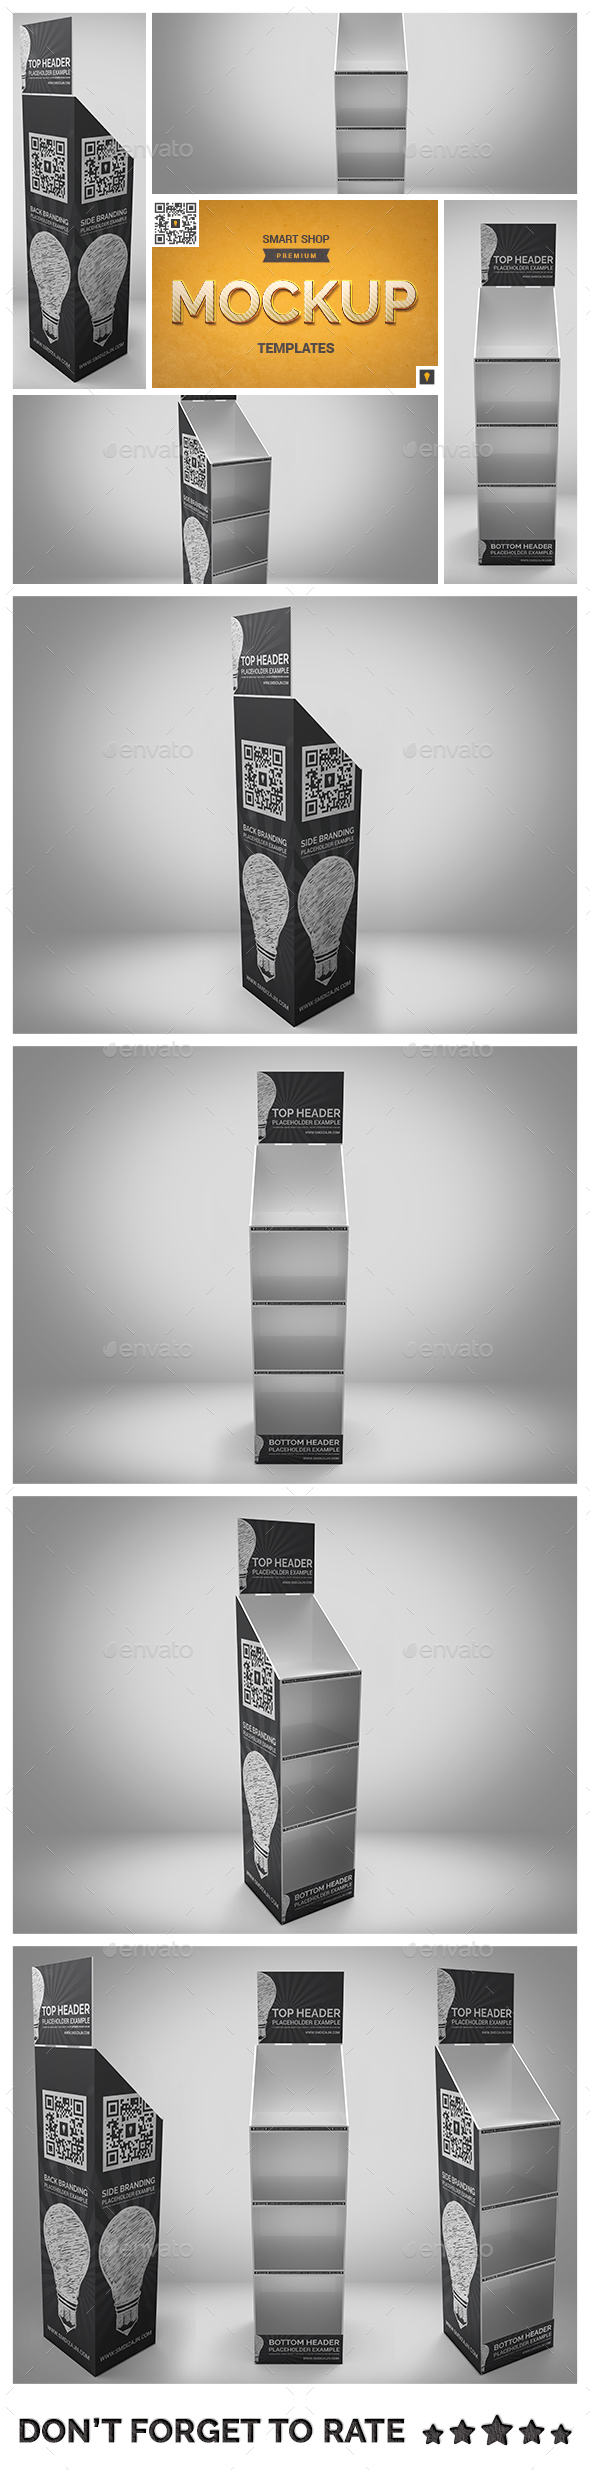 Download Promotional Store Shelf Stand Mockup by shockymocky | GraphicRiver